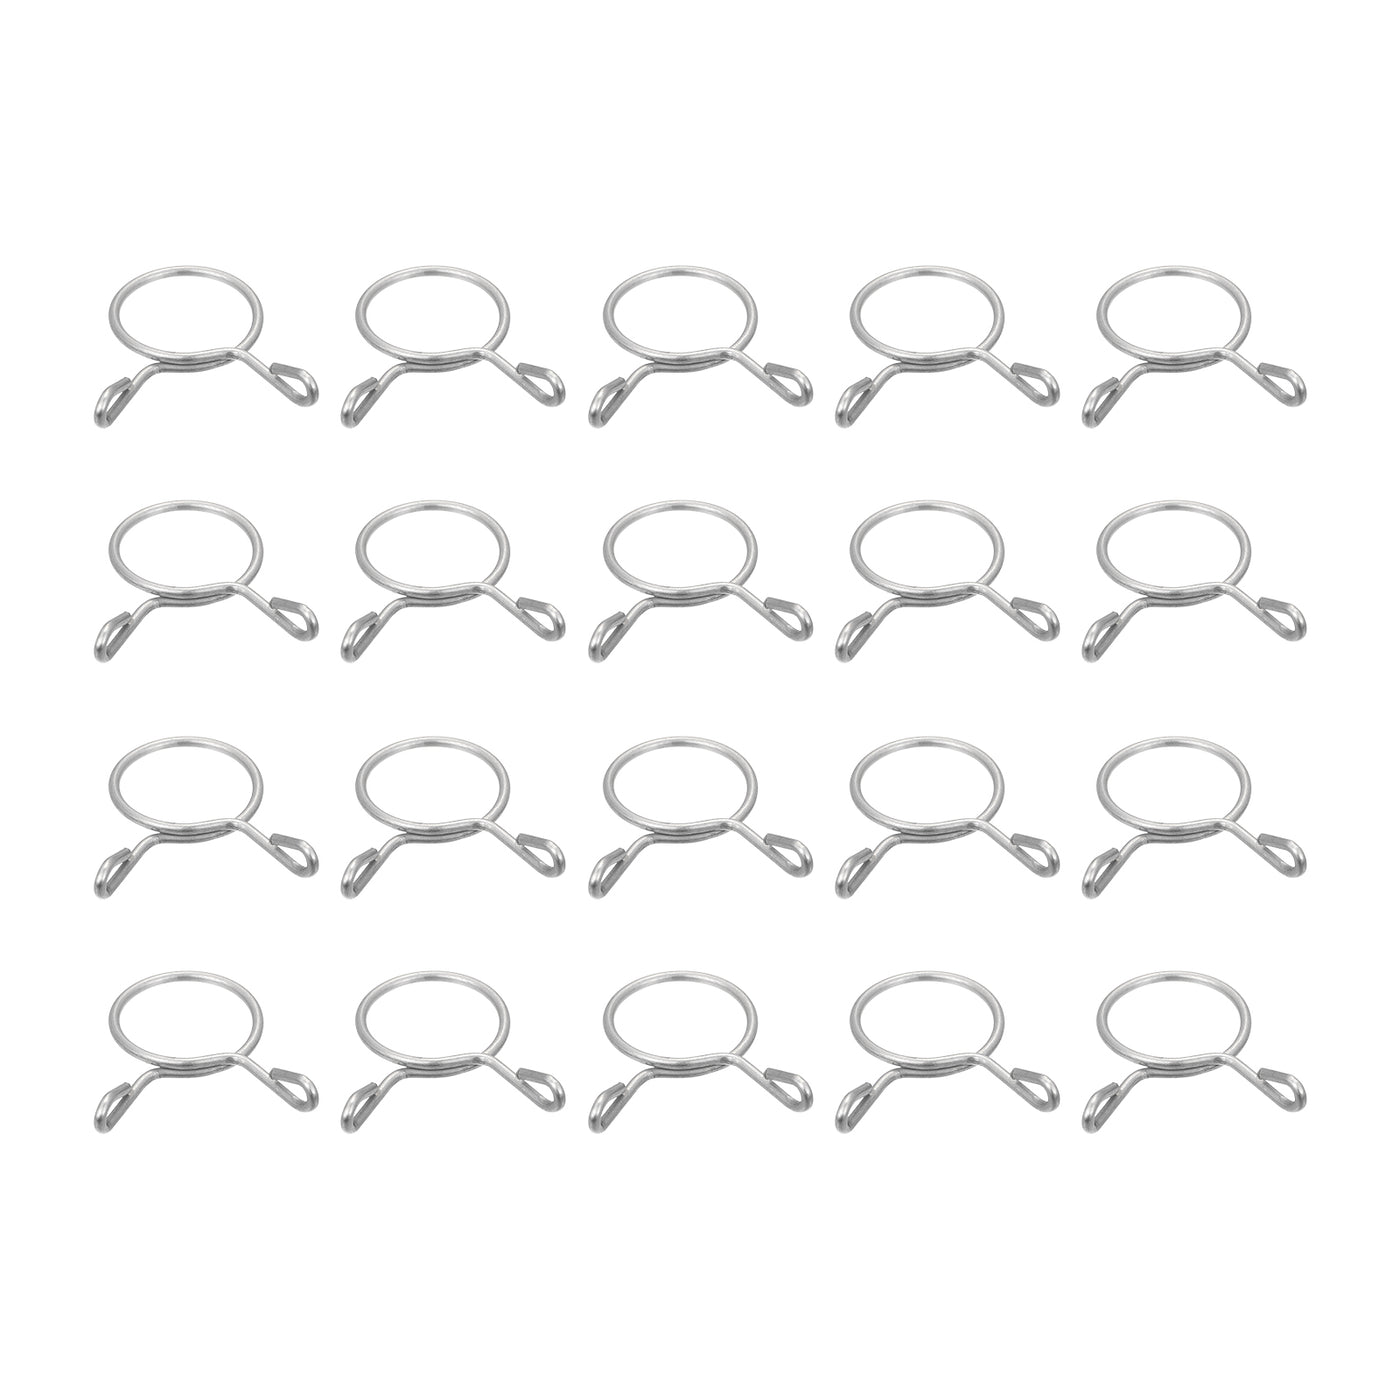 Uxcell Uxcell Fuel Line Hose Clips, 50pcs 18mm 304 Stainless Steel Tube Spring Clamps(Silver)